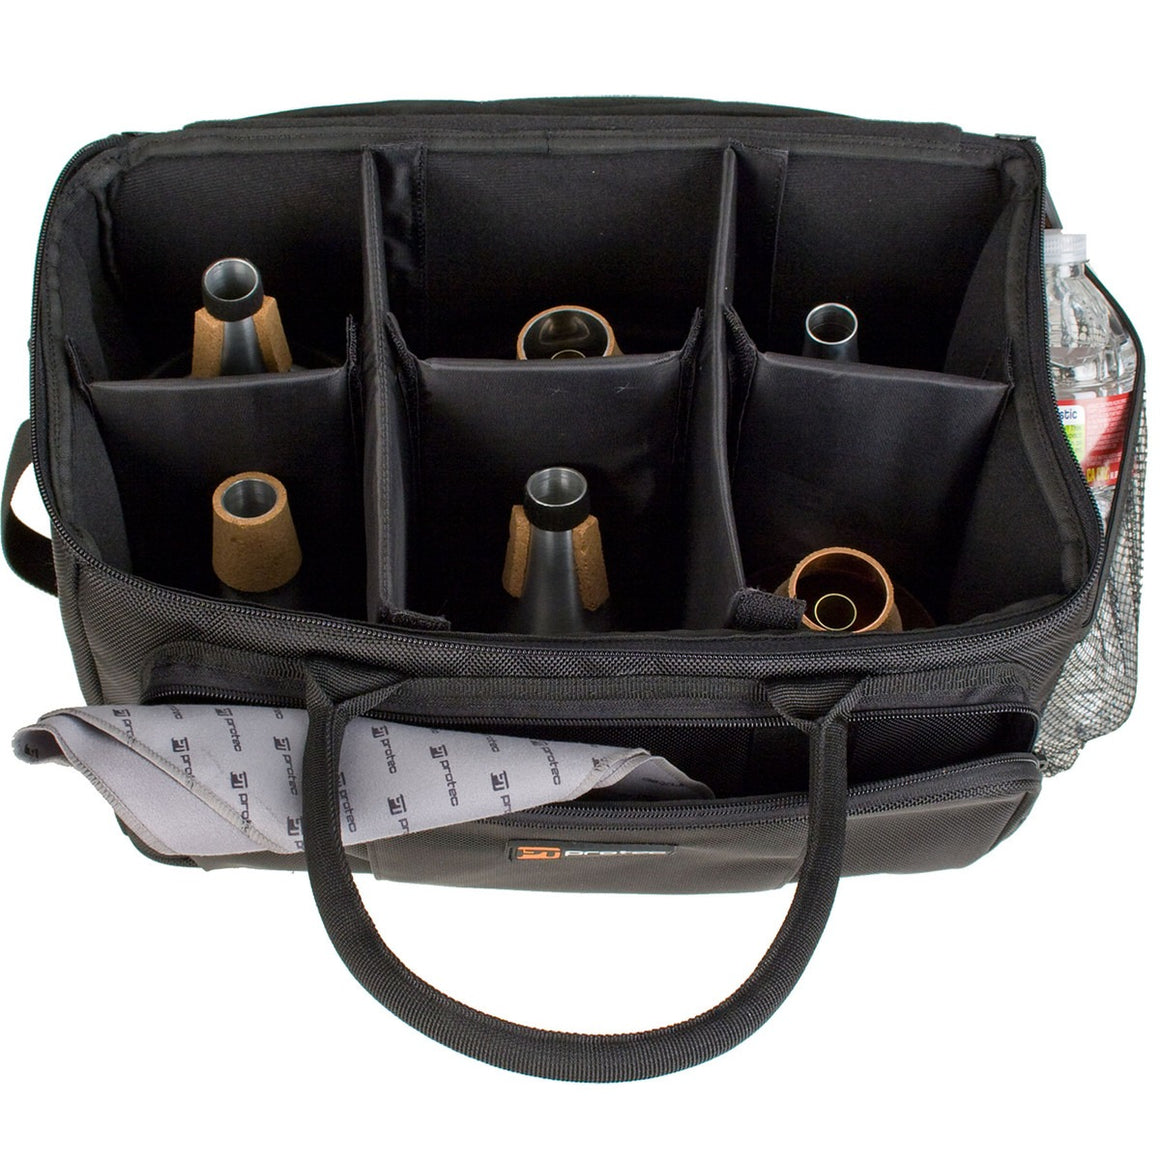 Protec M404 Multiple Trumpet Mute Bag with Modular Walls